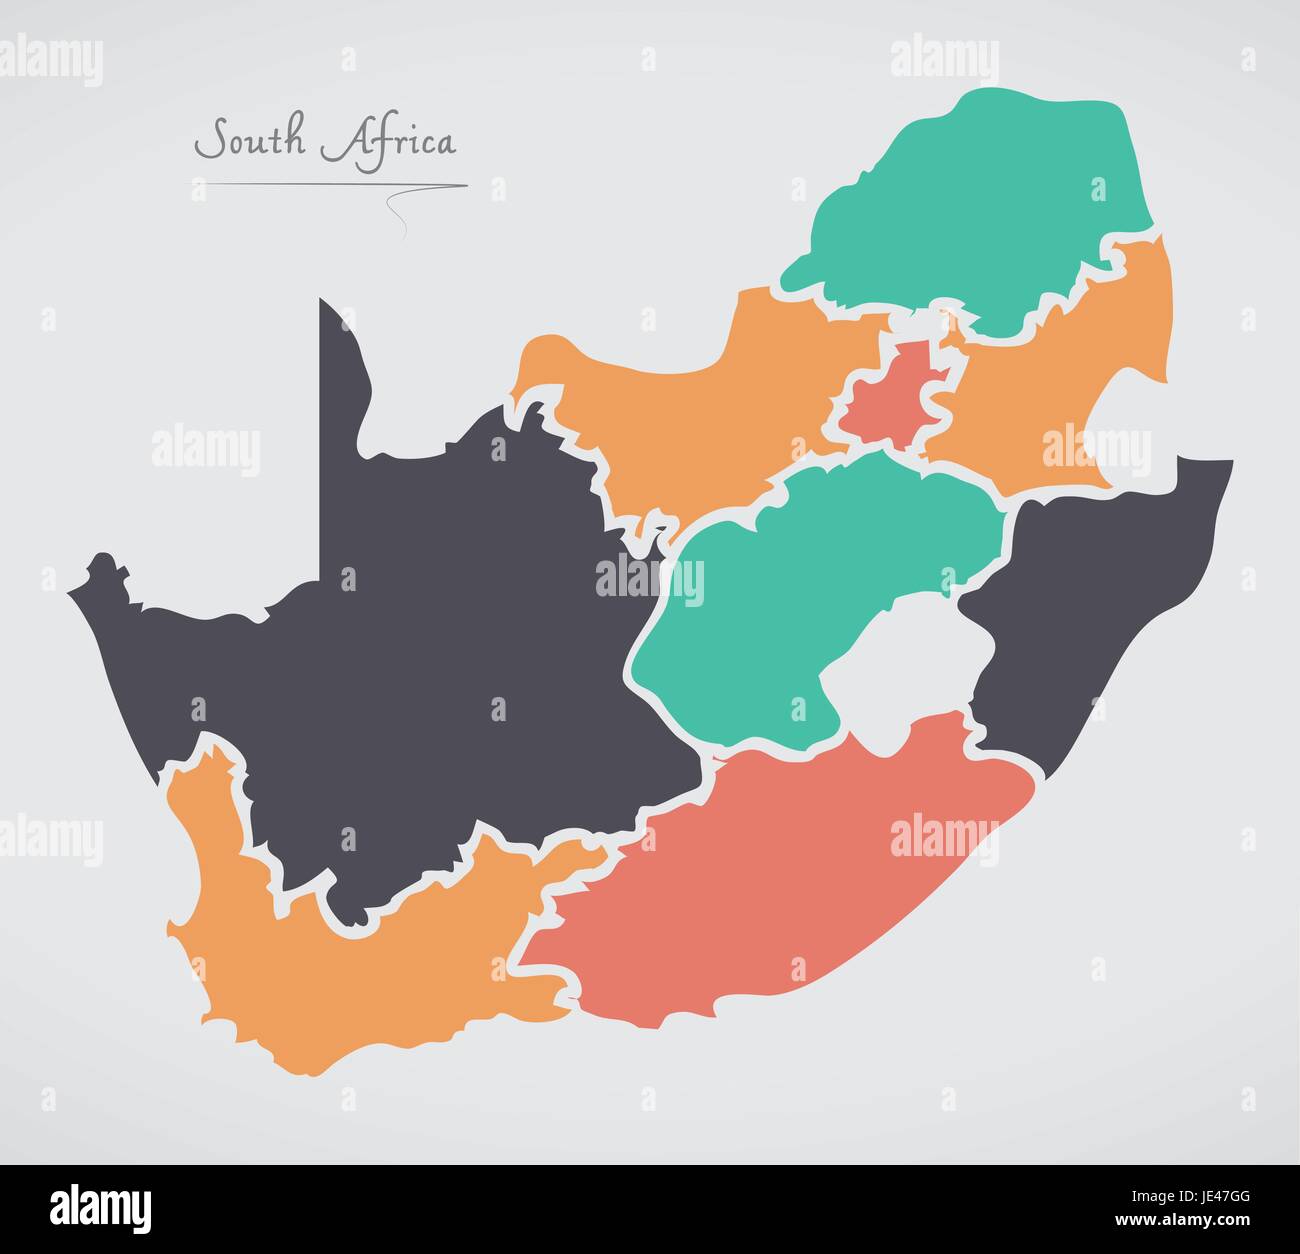 South Africa Map with states and modern round shapes Stock Vector